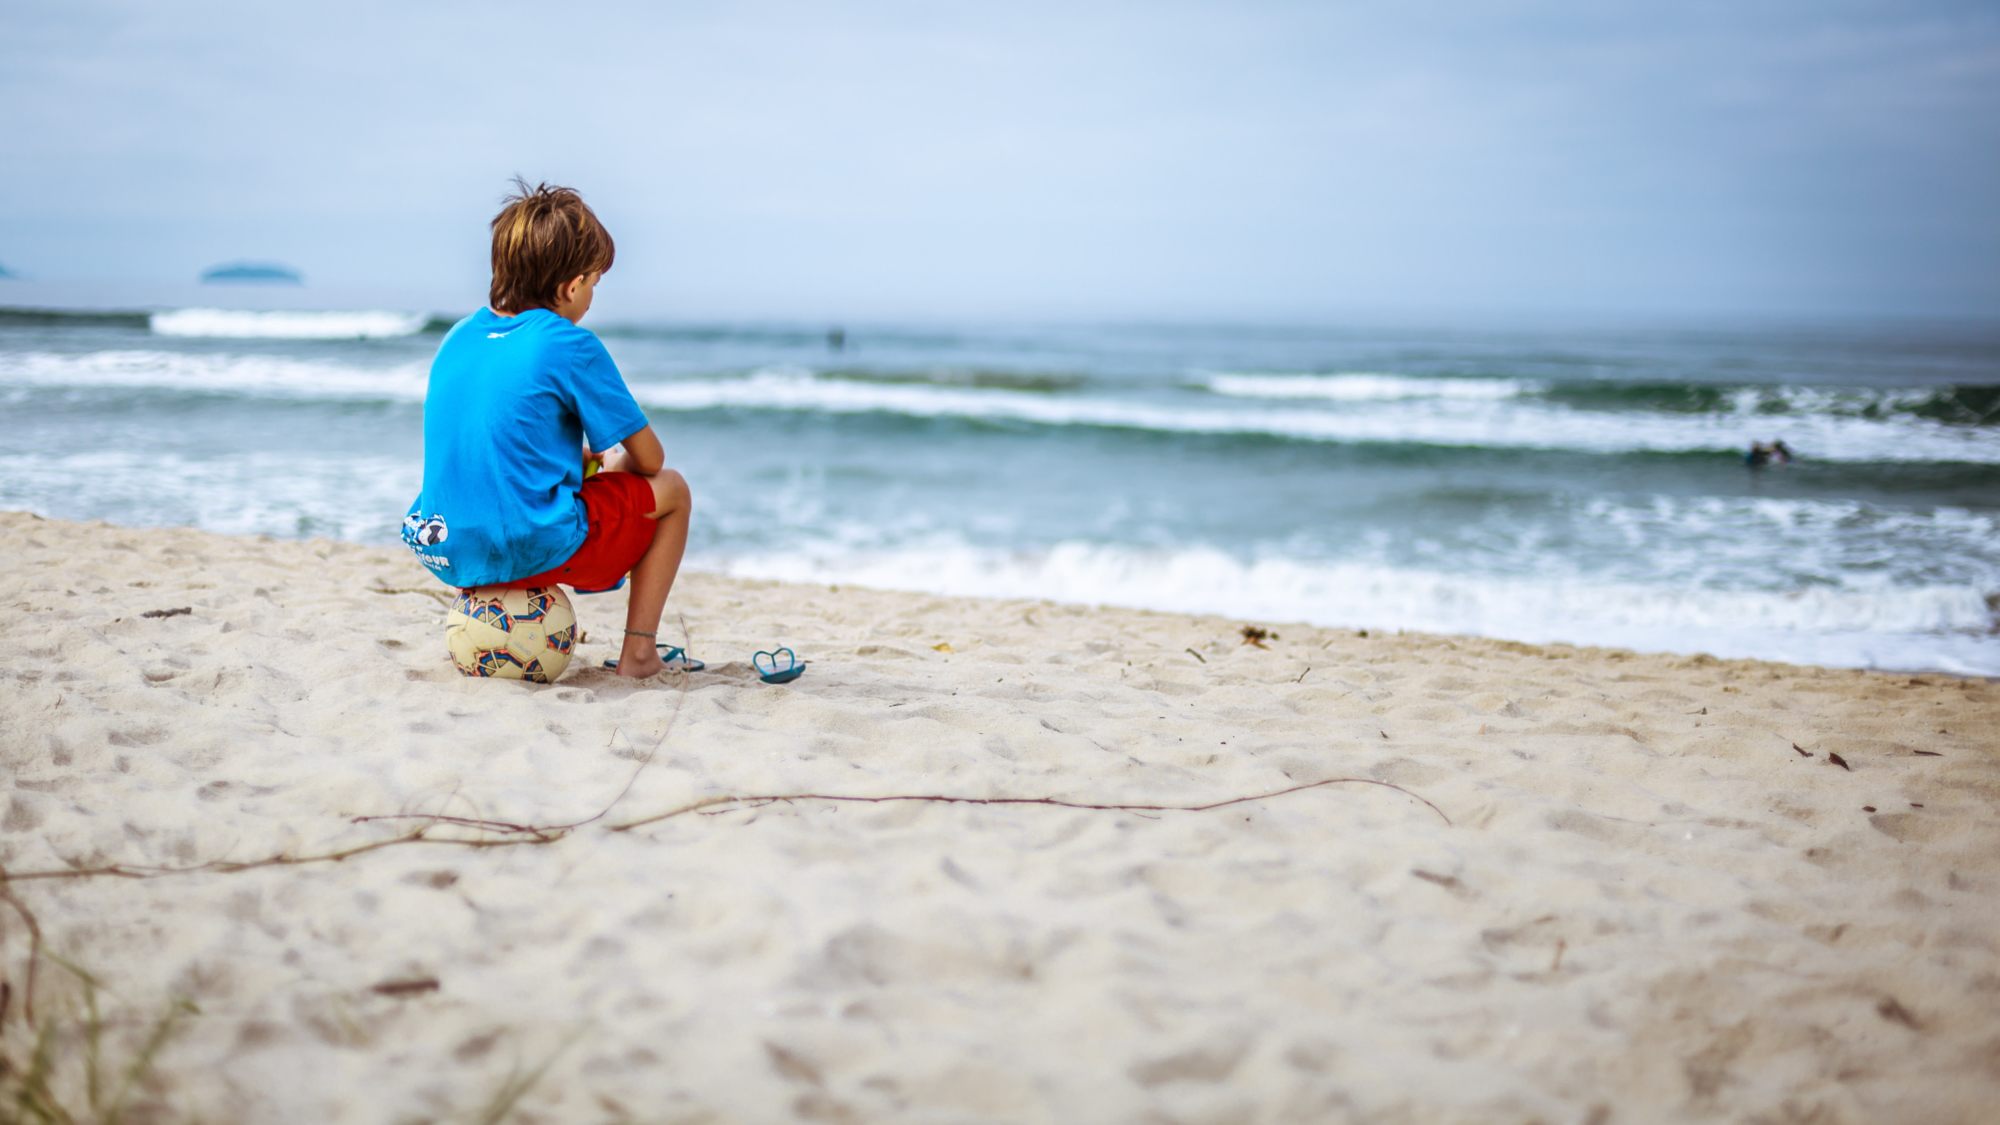 Child at the beach for summer break sitting on a soccer ball